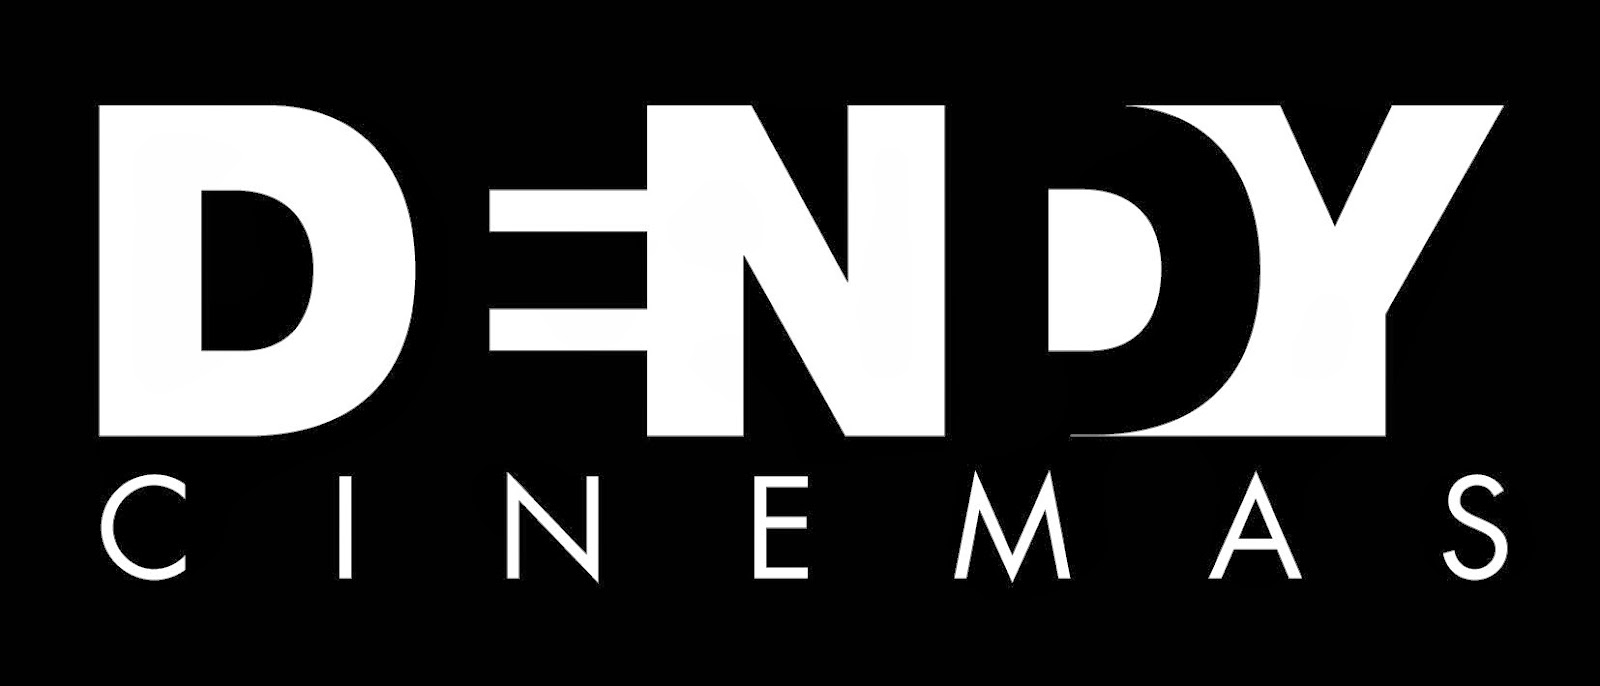 The Film Emporium Dendy Direct, A Video On Demand Service, To Launch In April 2014